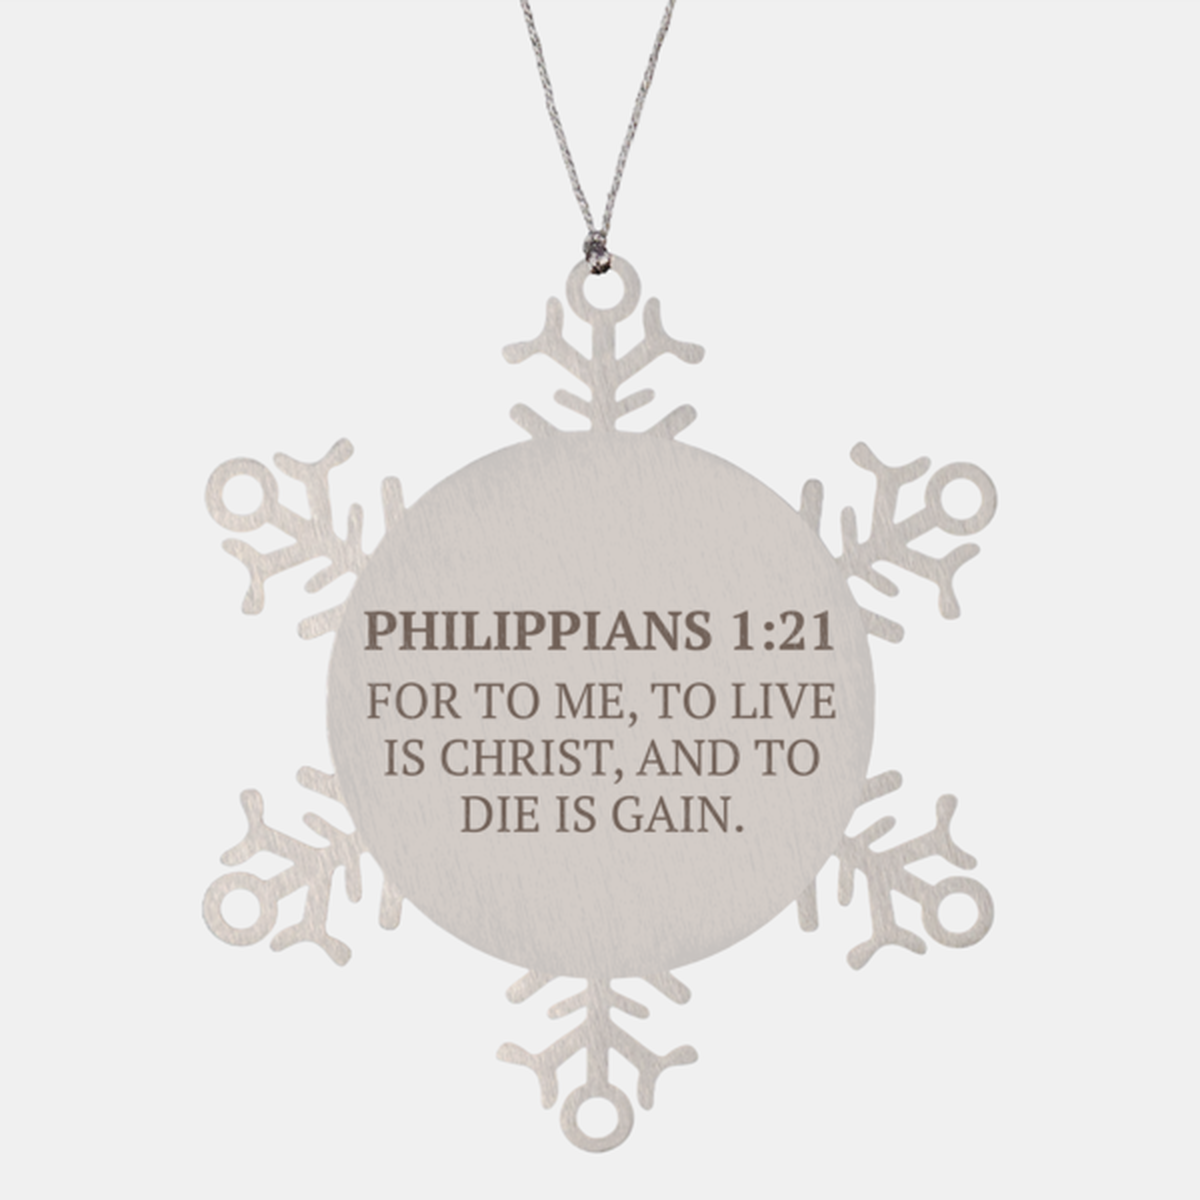 Christian Ornaments For Christmas Tree, For To Me, To Live Is Christ, And To Die Is Gain, Religious Christmas Decorations, Scripture Ornaments Gifts, Bible Verse Ornament